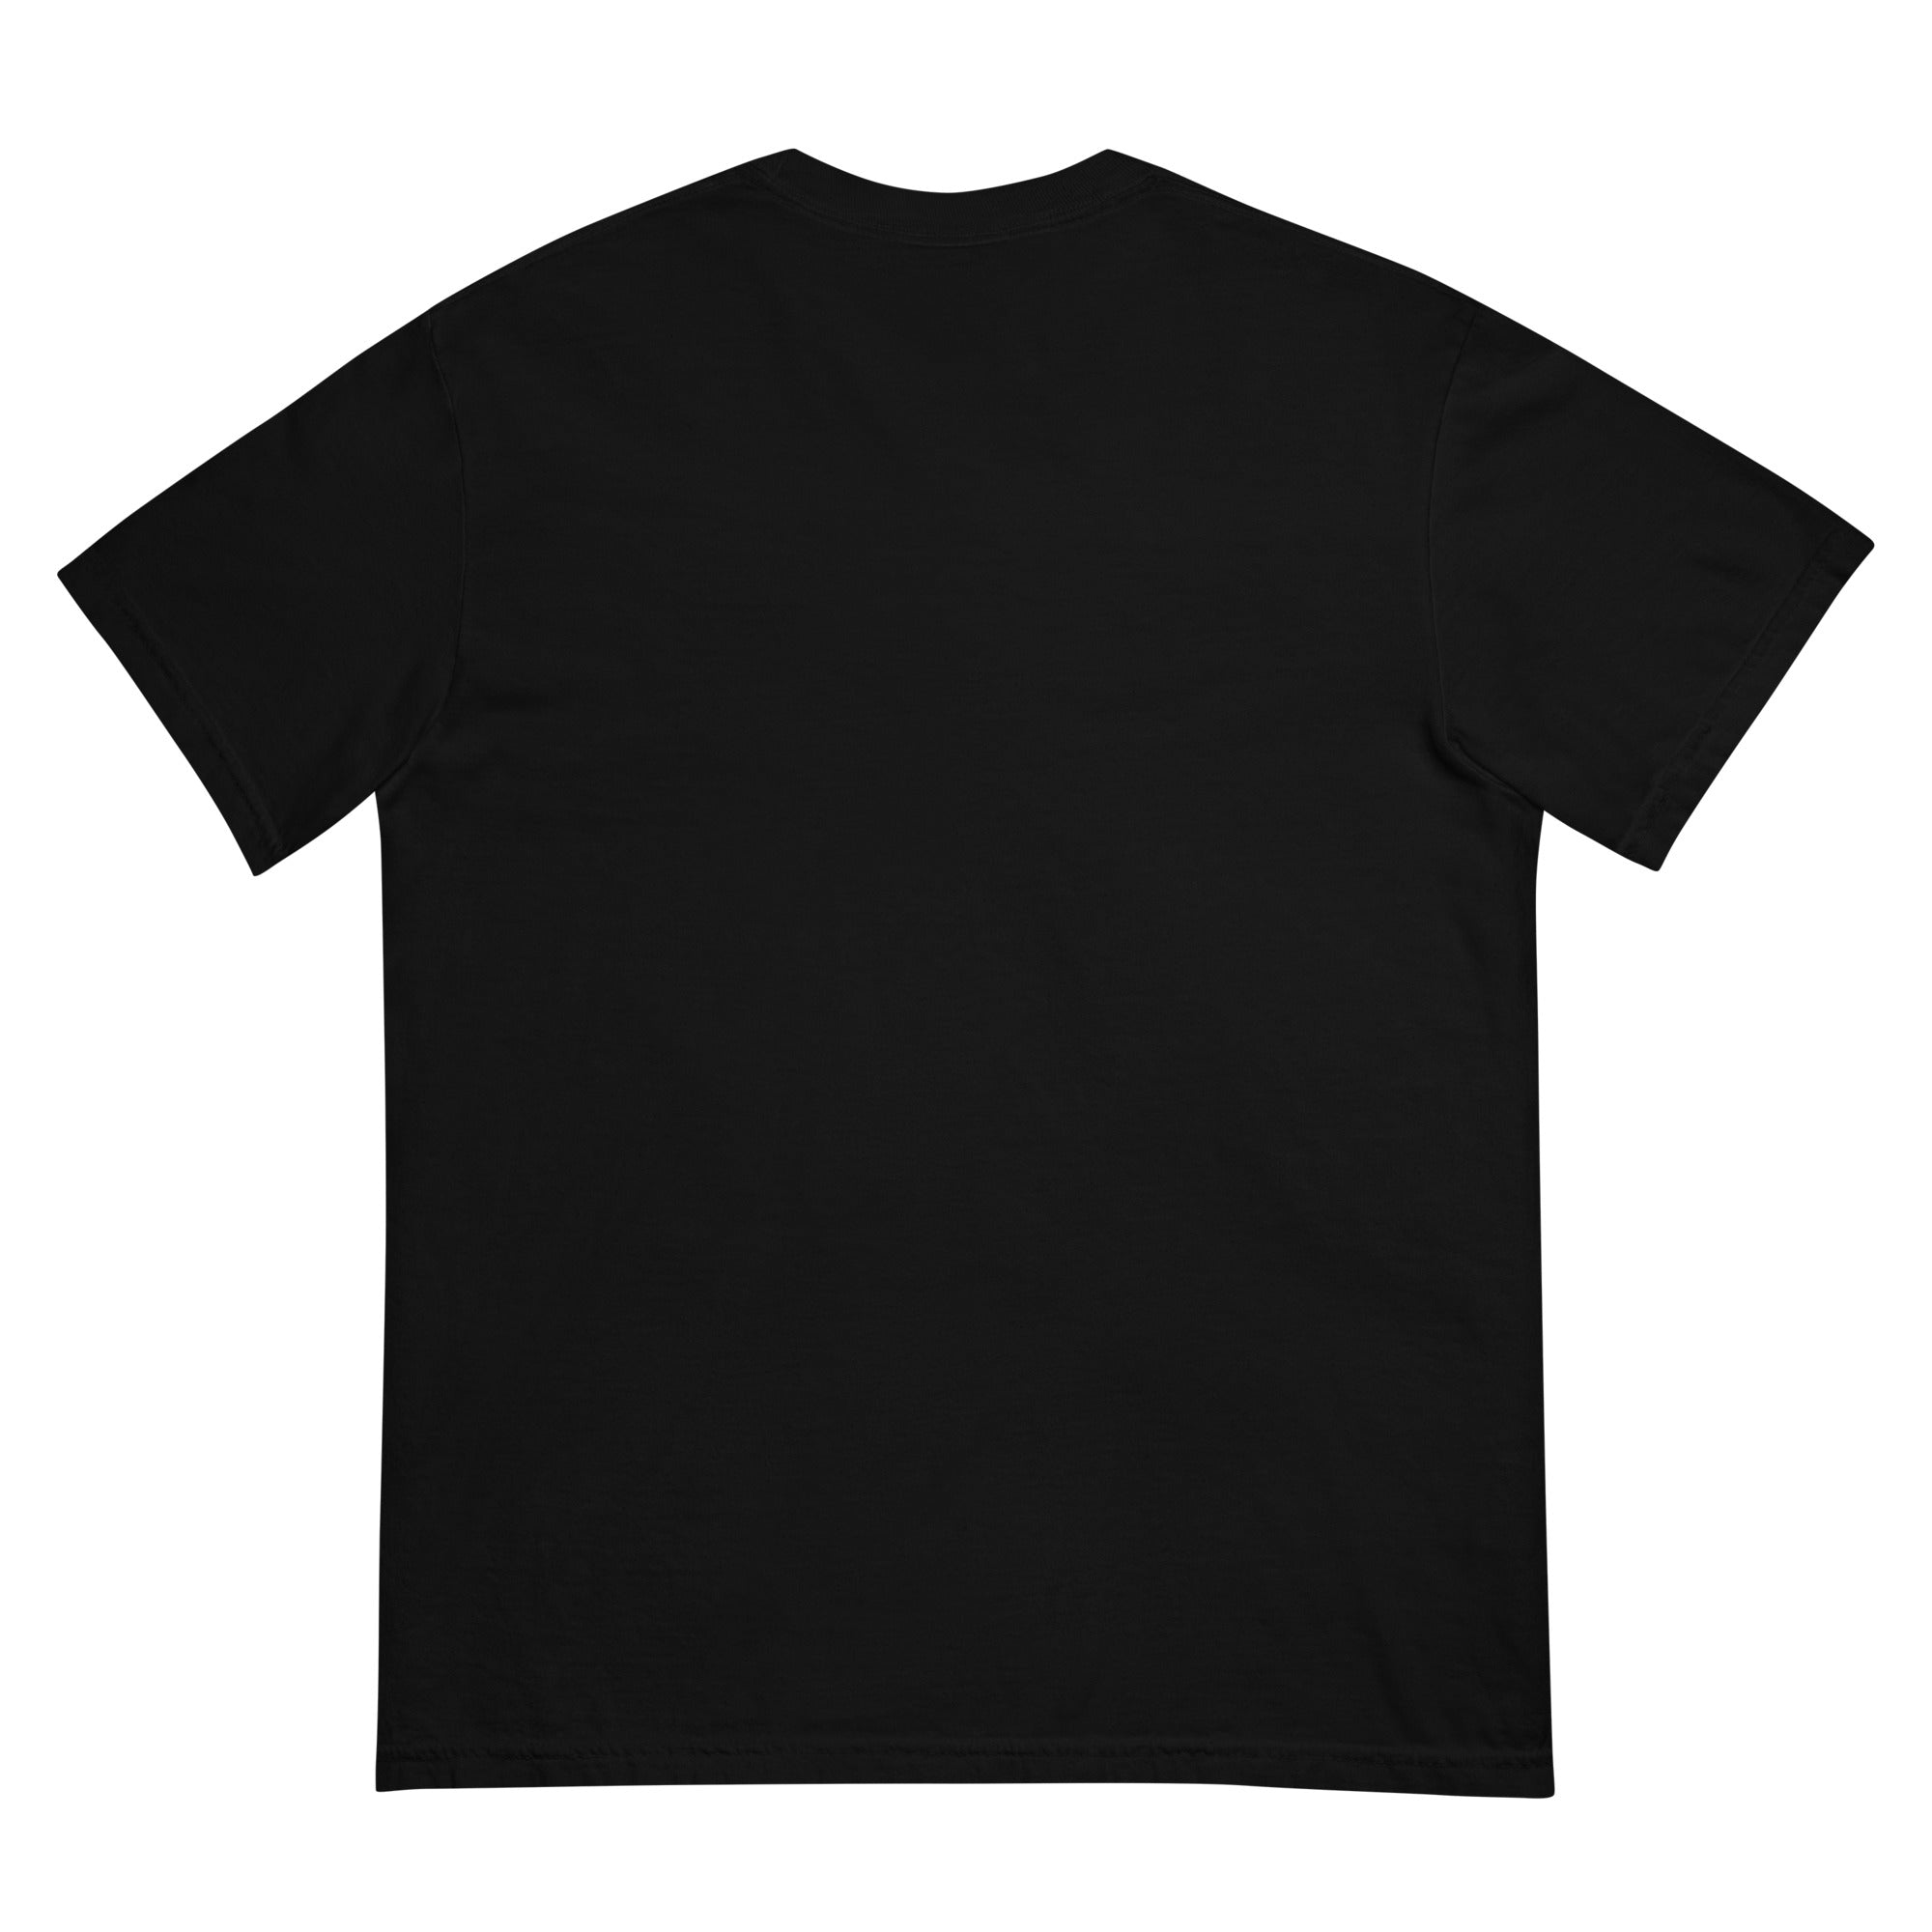 We Are the Carbon They Want To Reduce Garment-dyed Heavyweight T-Shirt